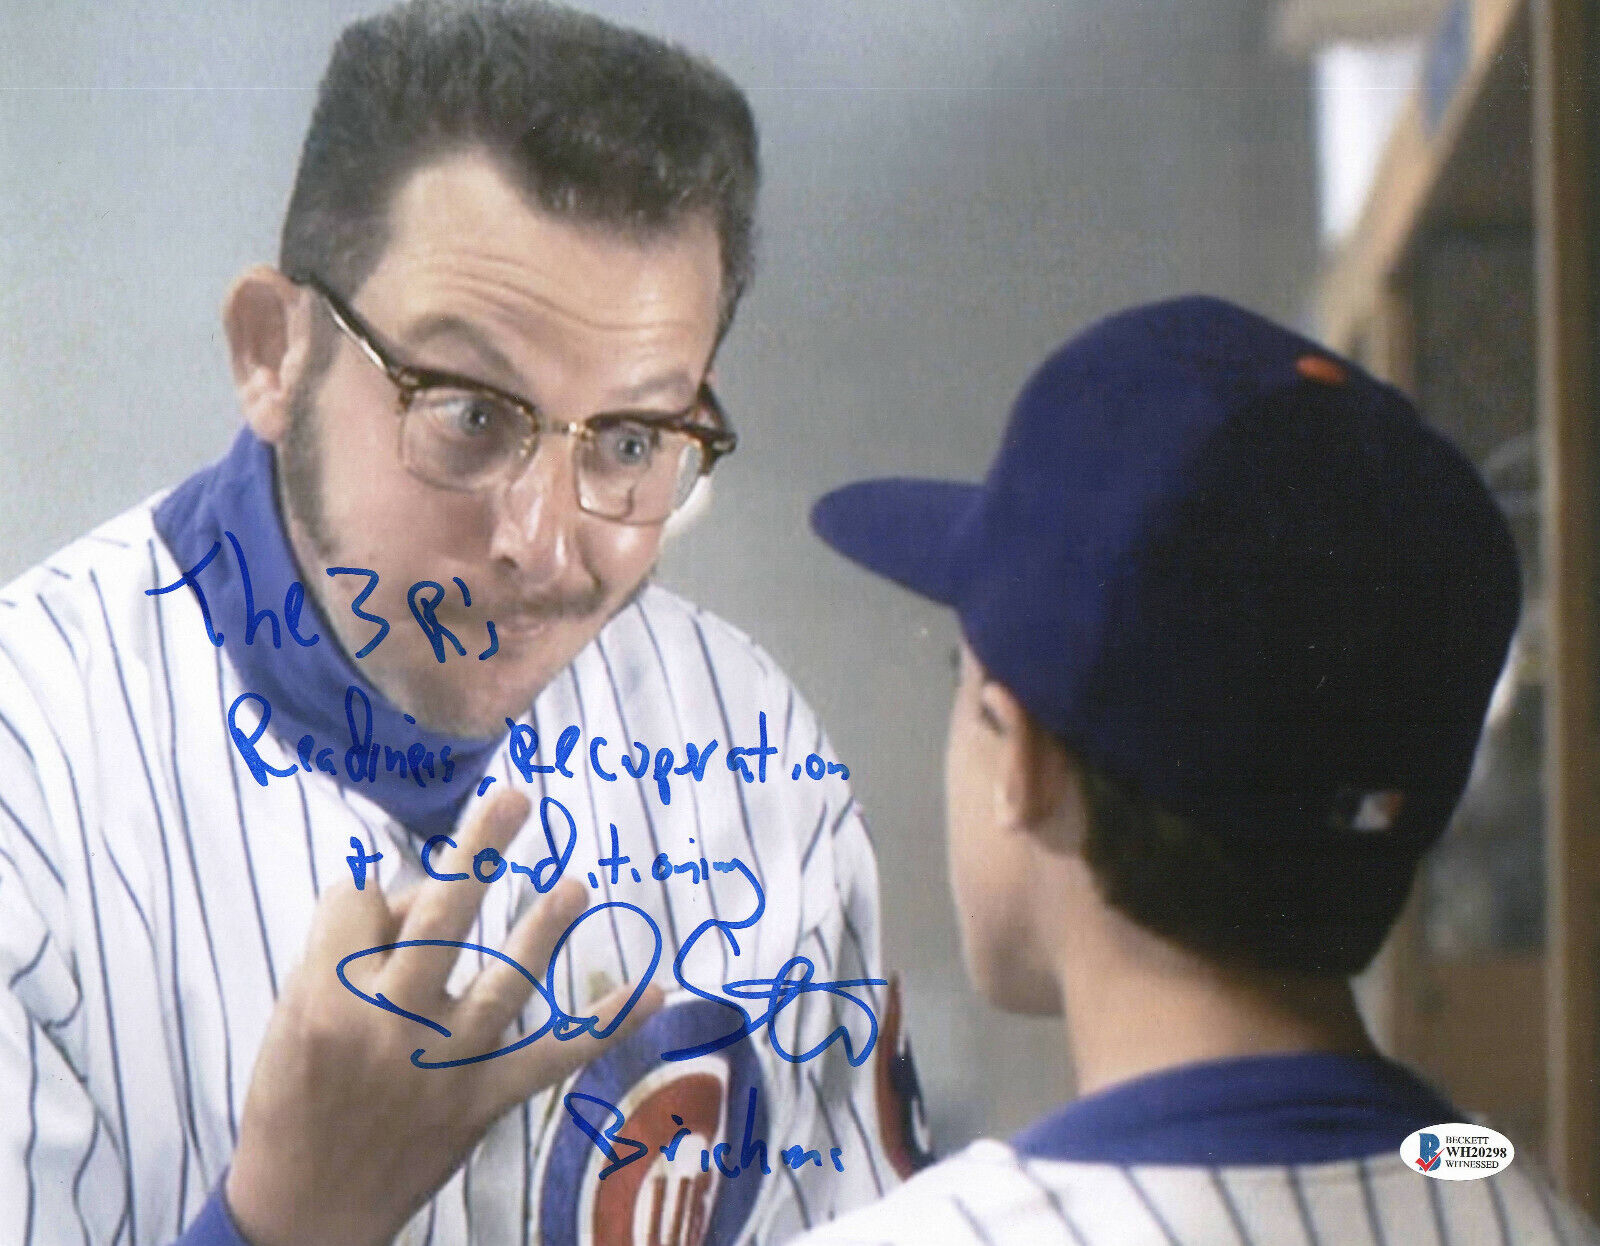 DANIEL STERN SIGNED AUTOGRAPH ROOKIE OF THE YEAR 11X14 PHOTO BECKETT 21